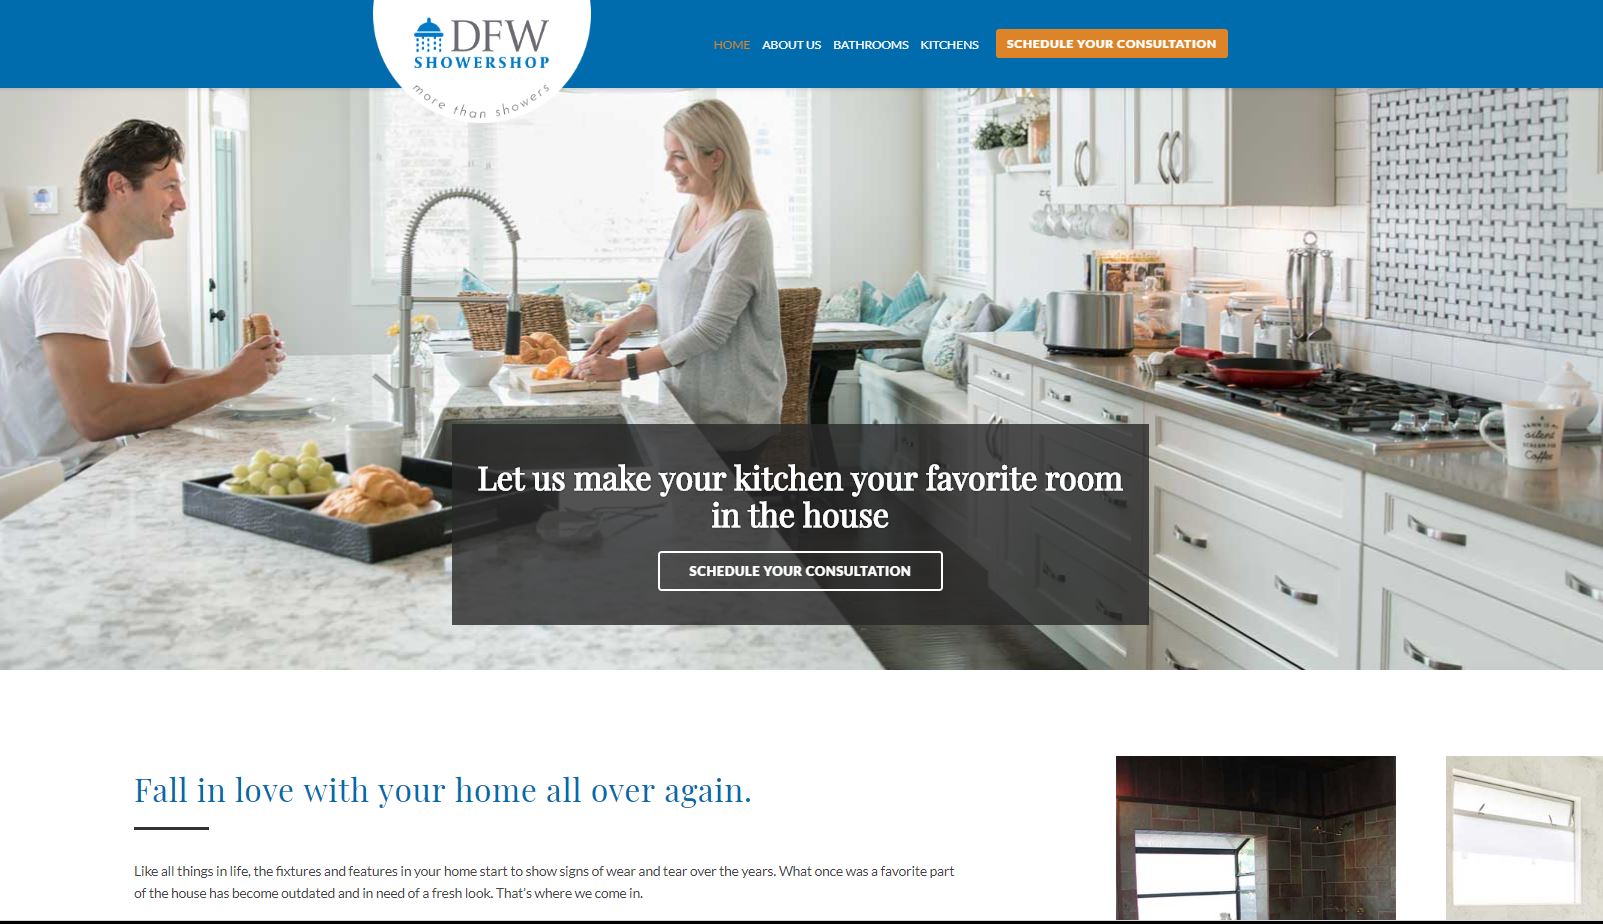 DFW Shower Shop Entices New Customers with their Redesigned Website